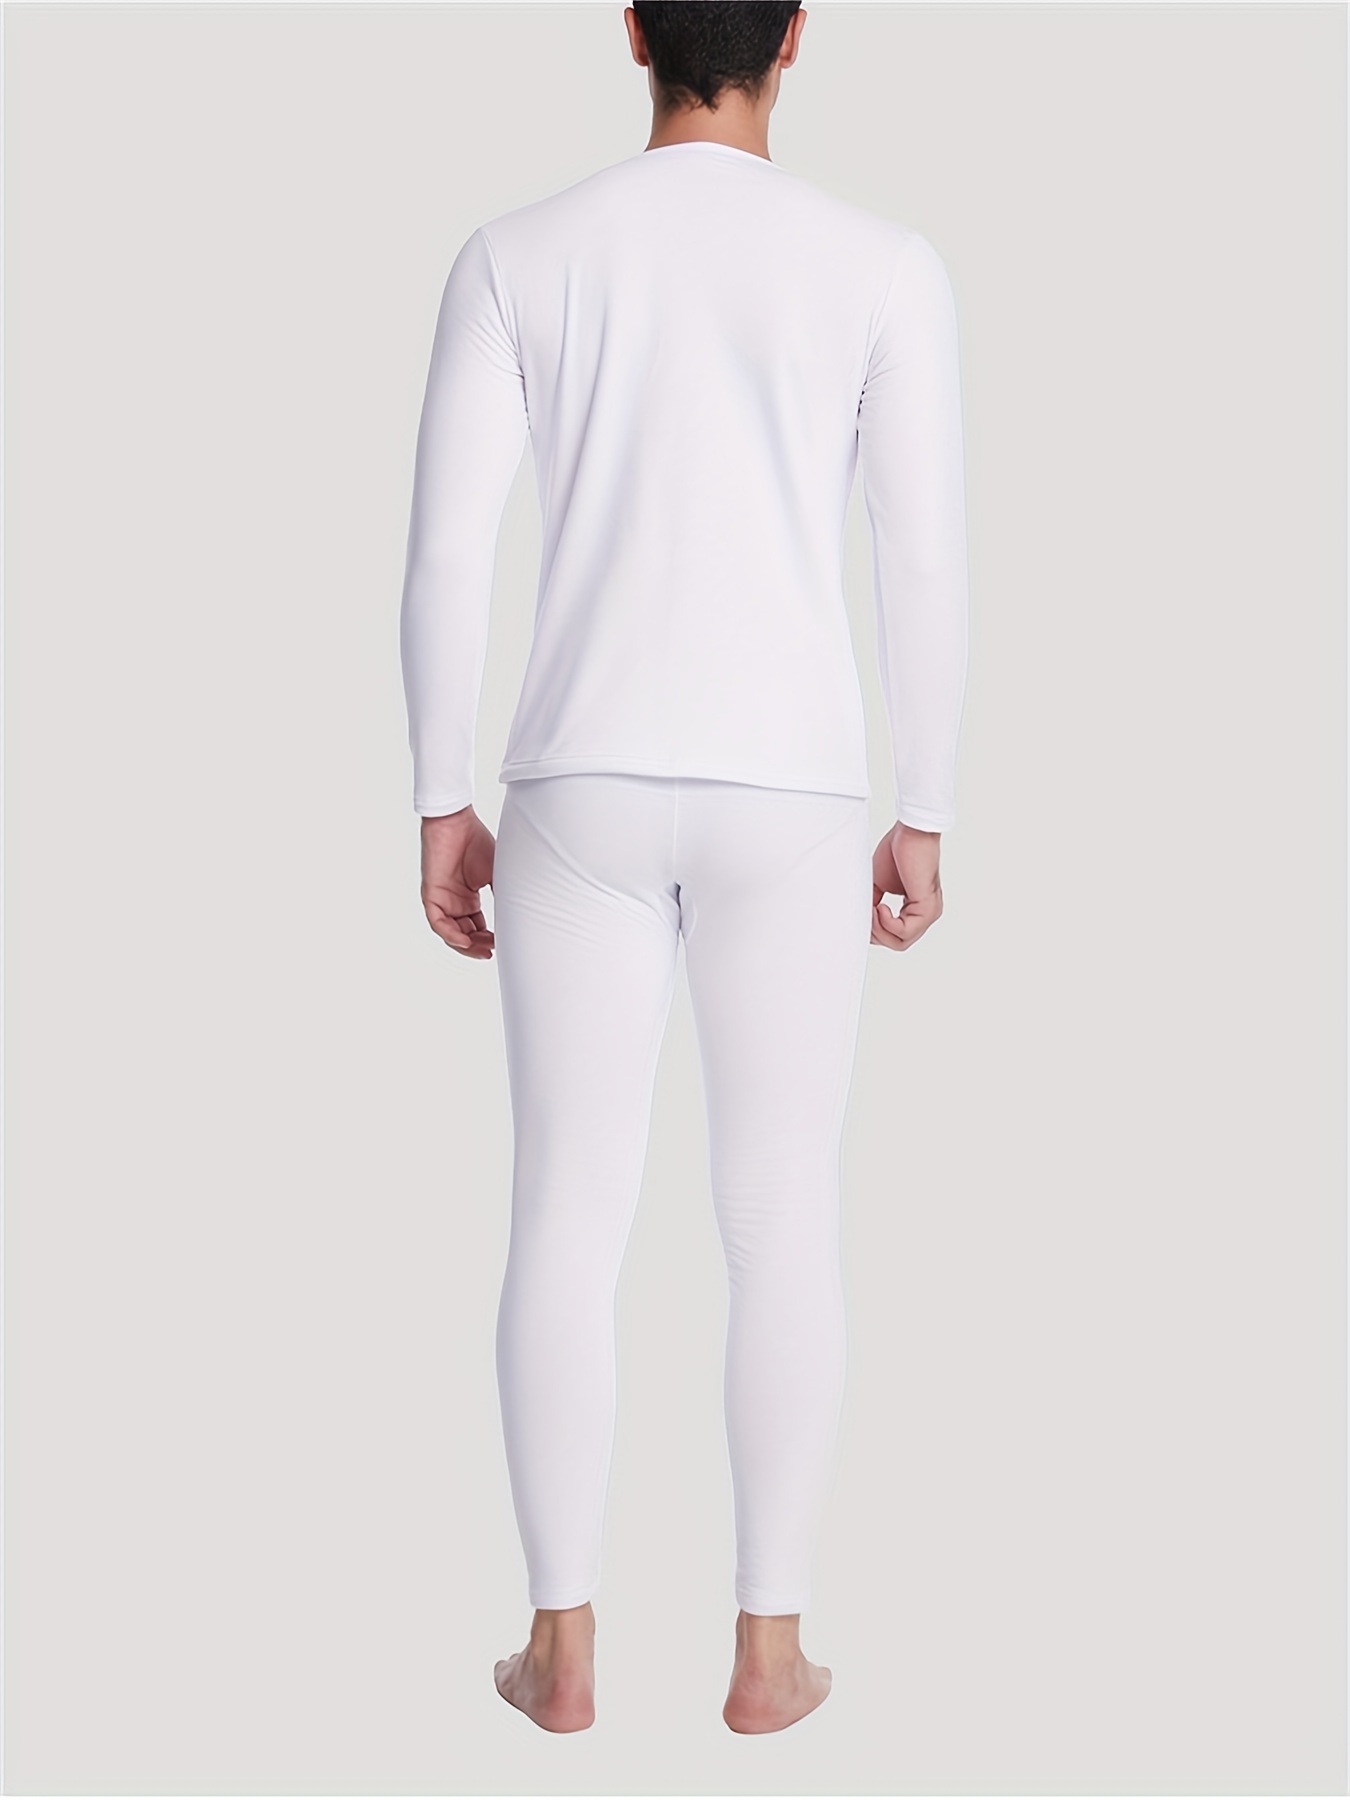 Long Johns for Men Thermal Set Big and Tall Long Underwear Warm Base Layer  Mens Thermals Top and Bottom Set